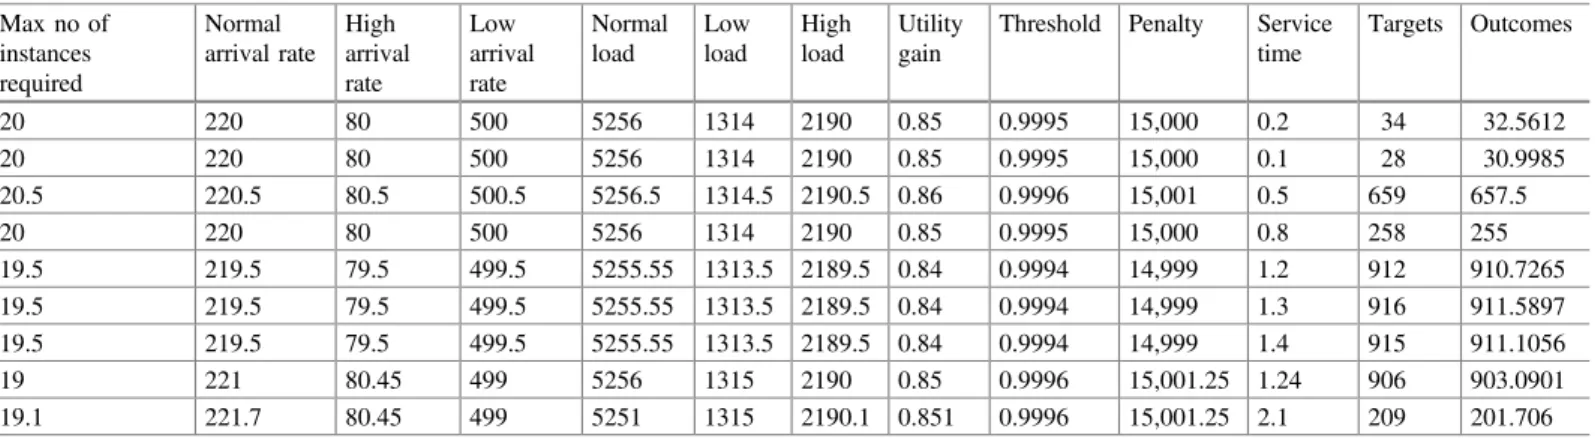 Table 1 Trainlm results Max no of instances required Normal arrival rate High arrivalrate Low arrivalrate Normalload Lowload Highload Utilitygain